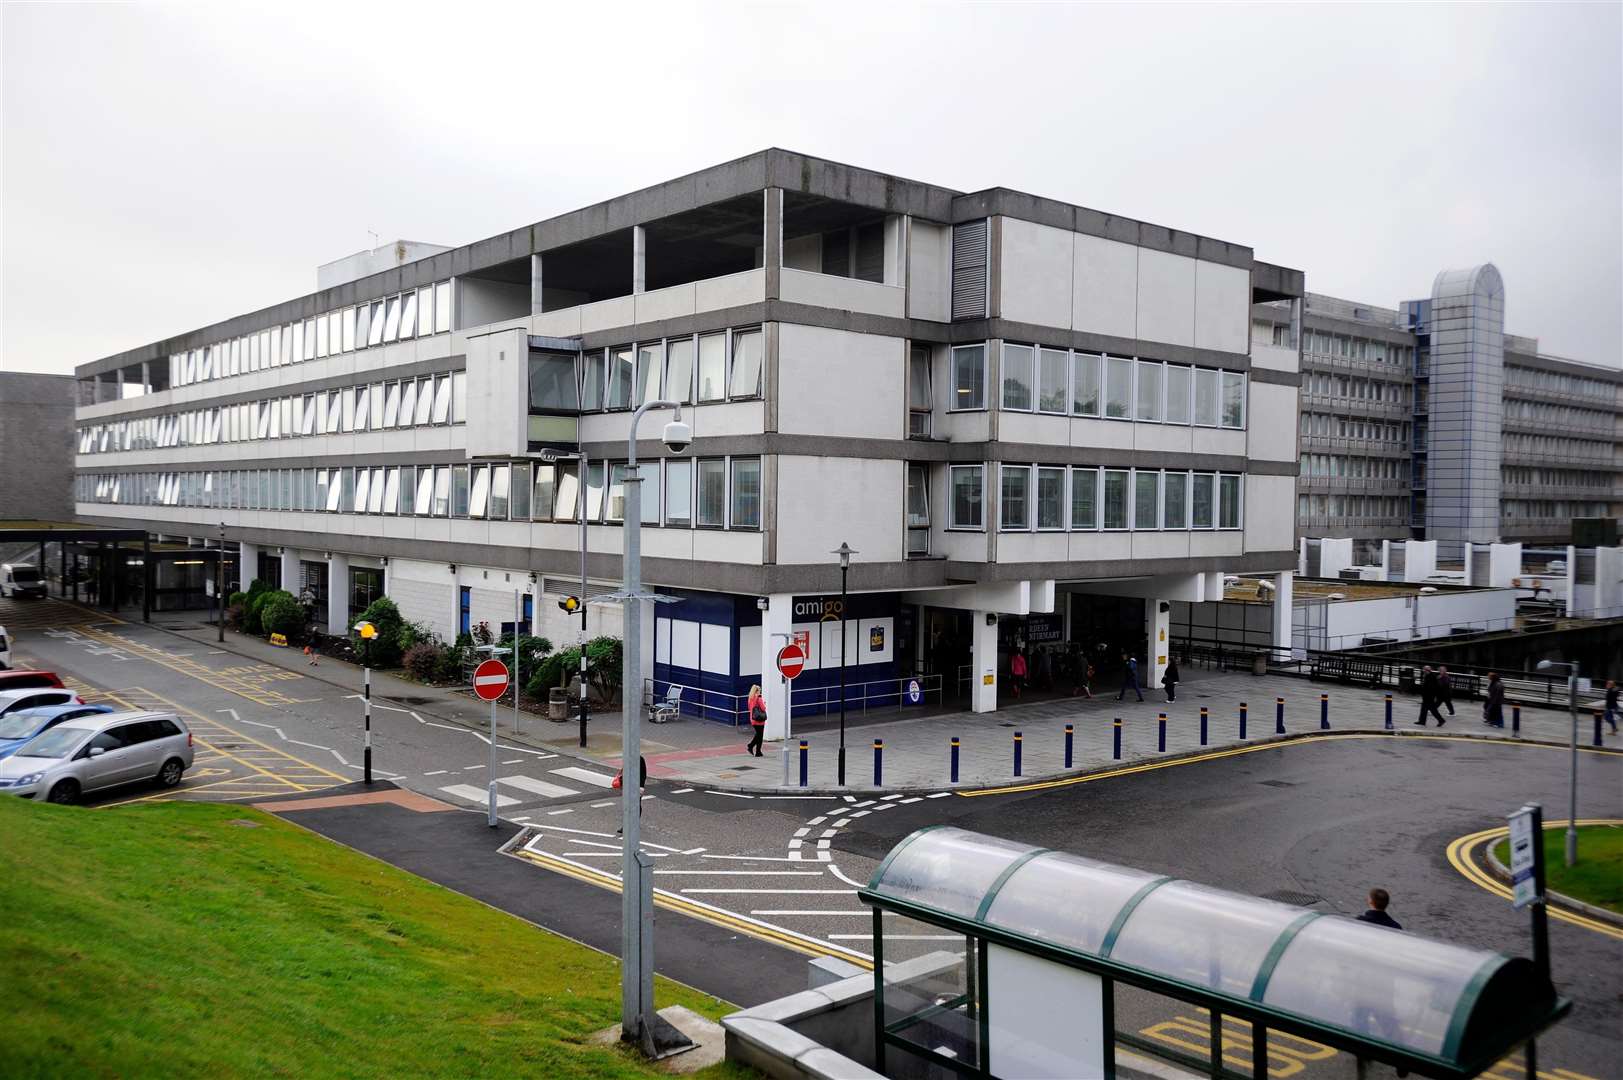 Aberdeen Royal Infirmary is one of the hospitals affected by the new restrictions.